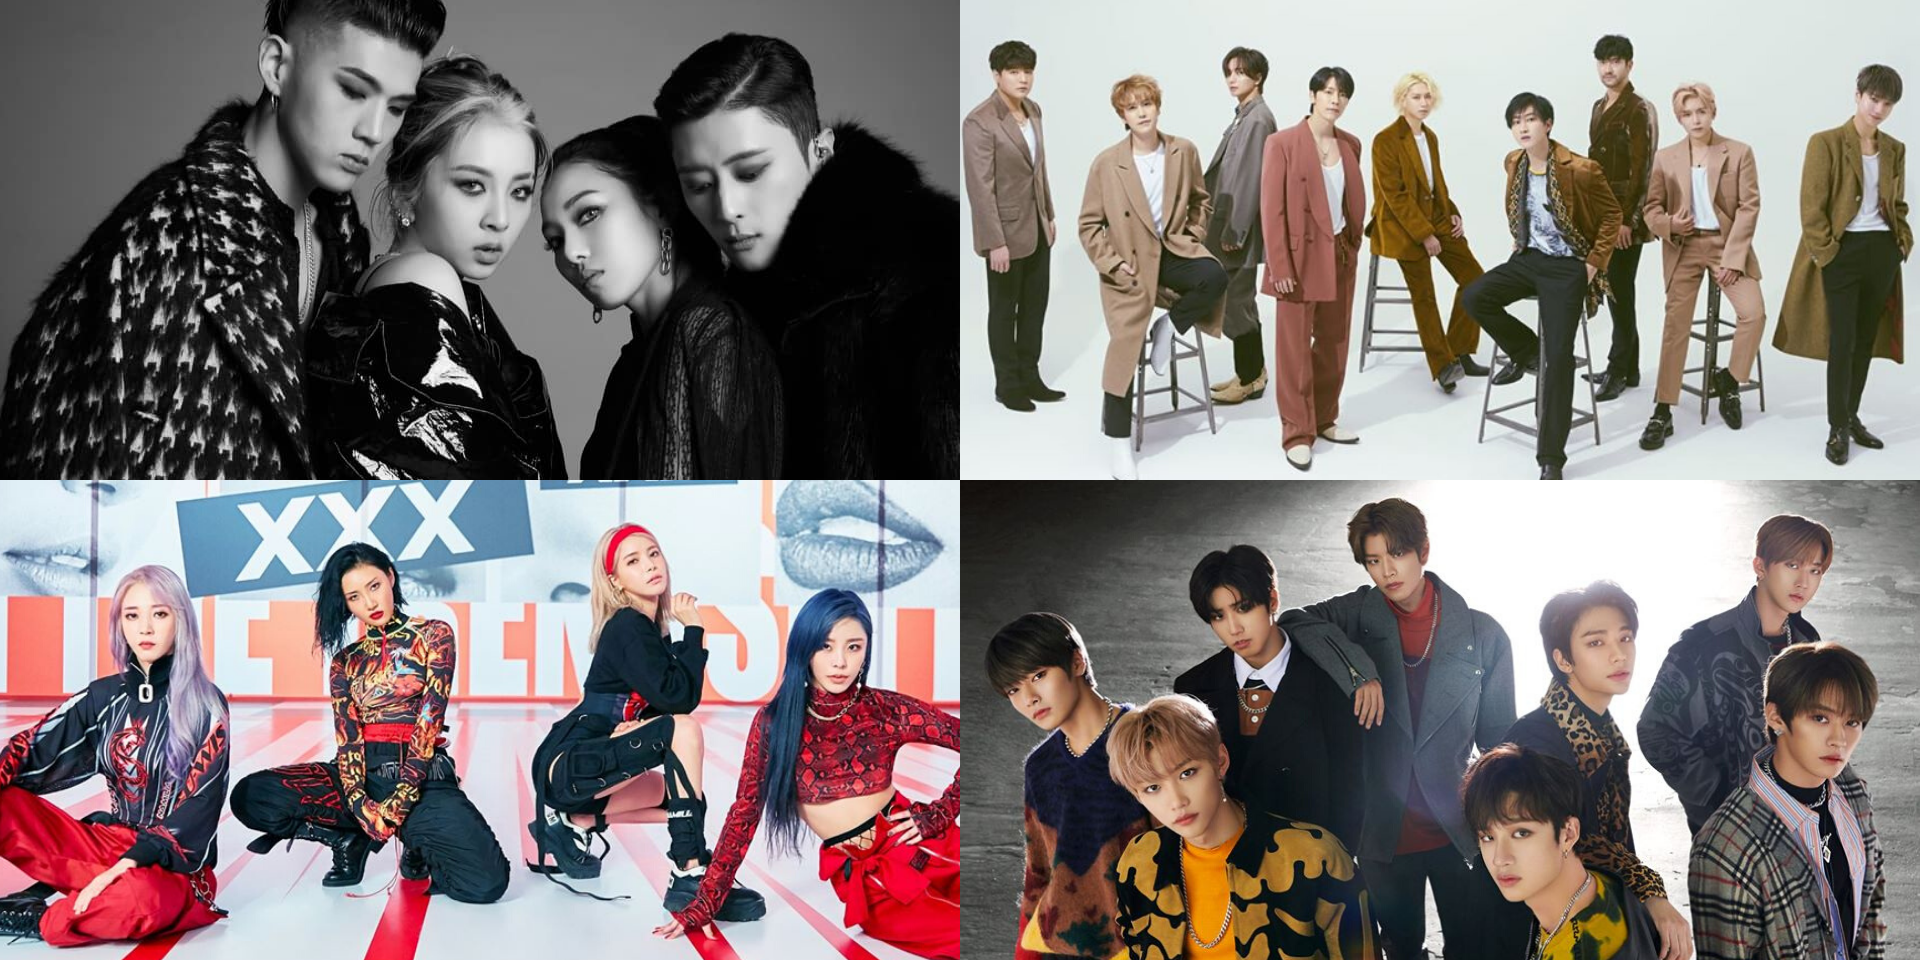 Super Junior, MAMAMOO, Stray Kids, KARD, and more to perform at World is ONE K-pop charity concert